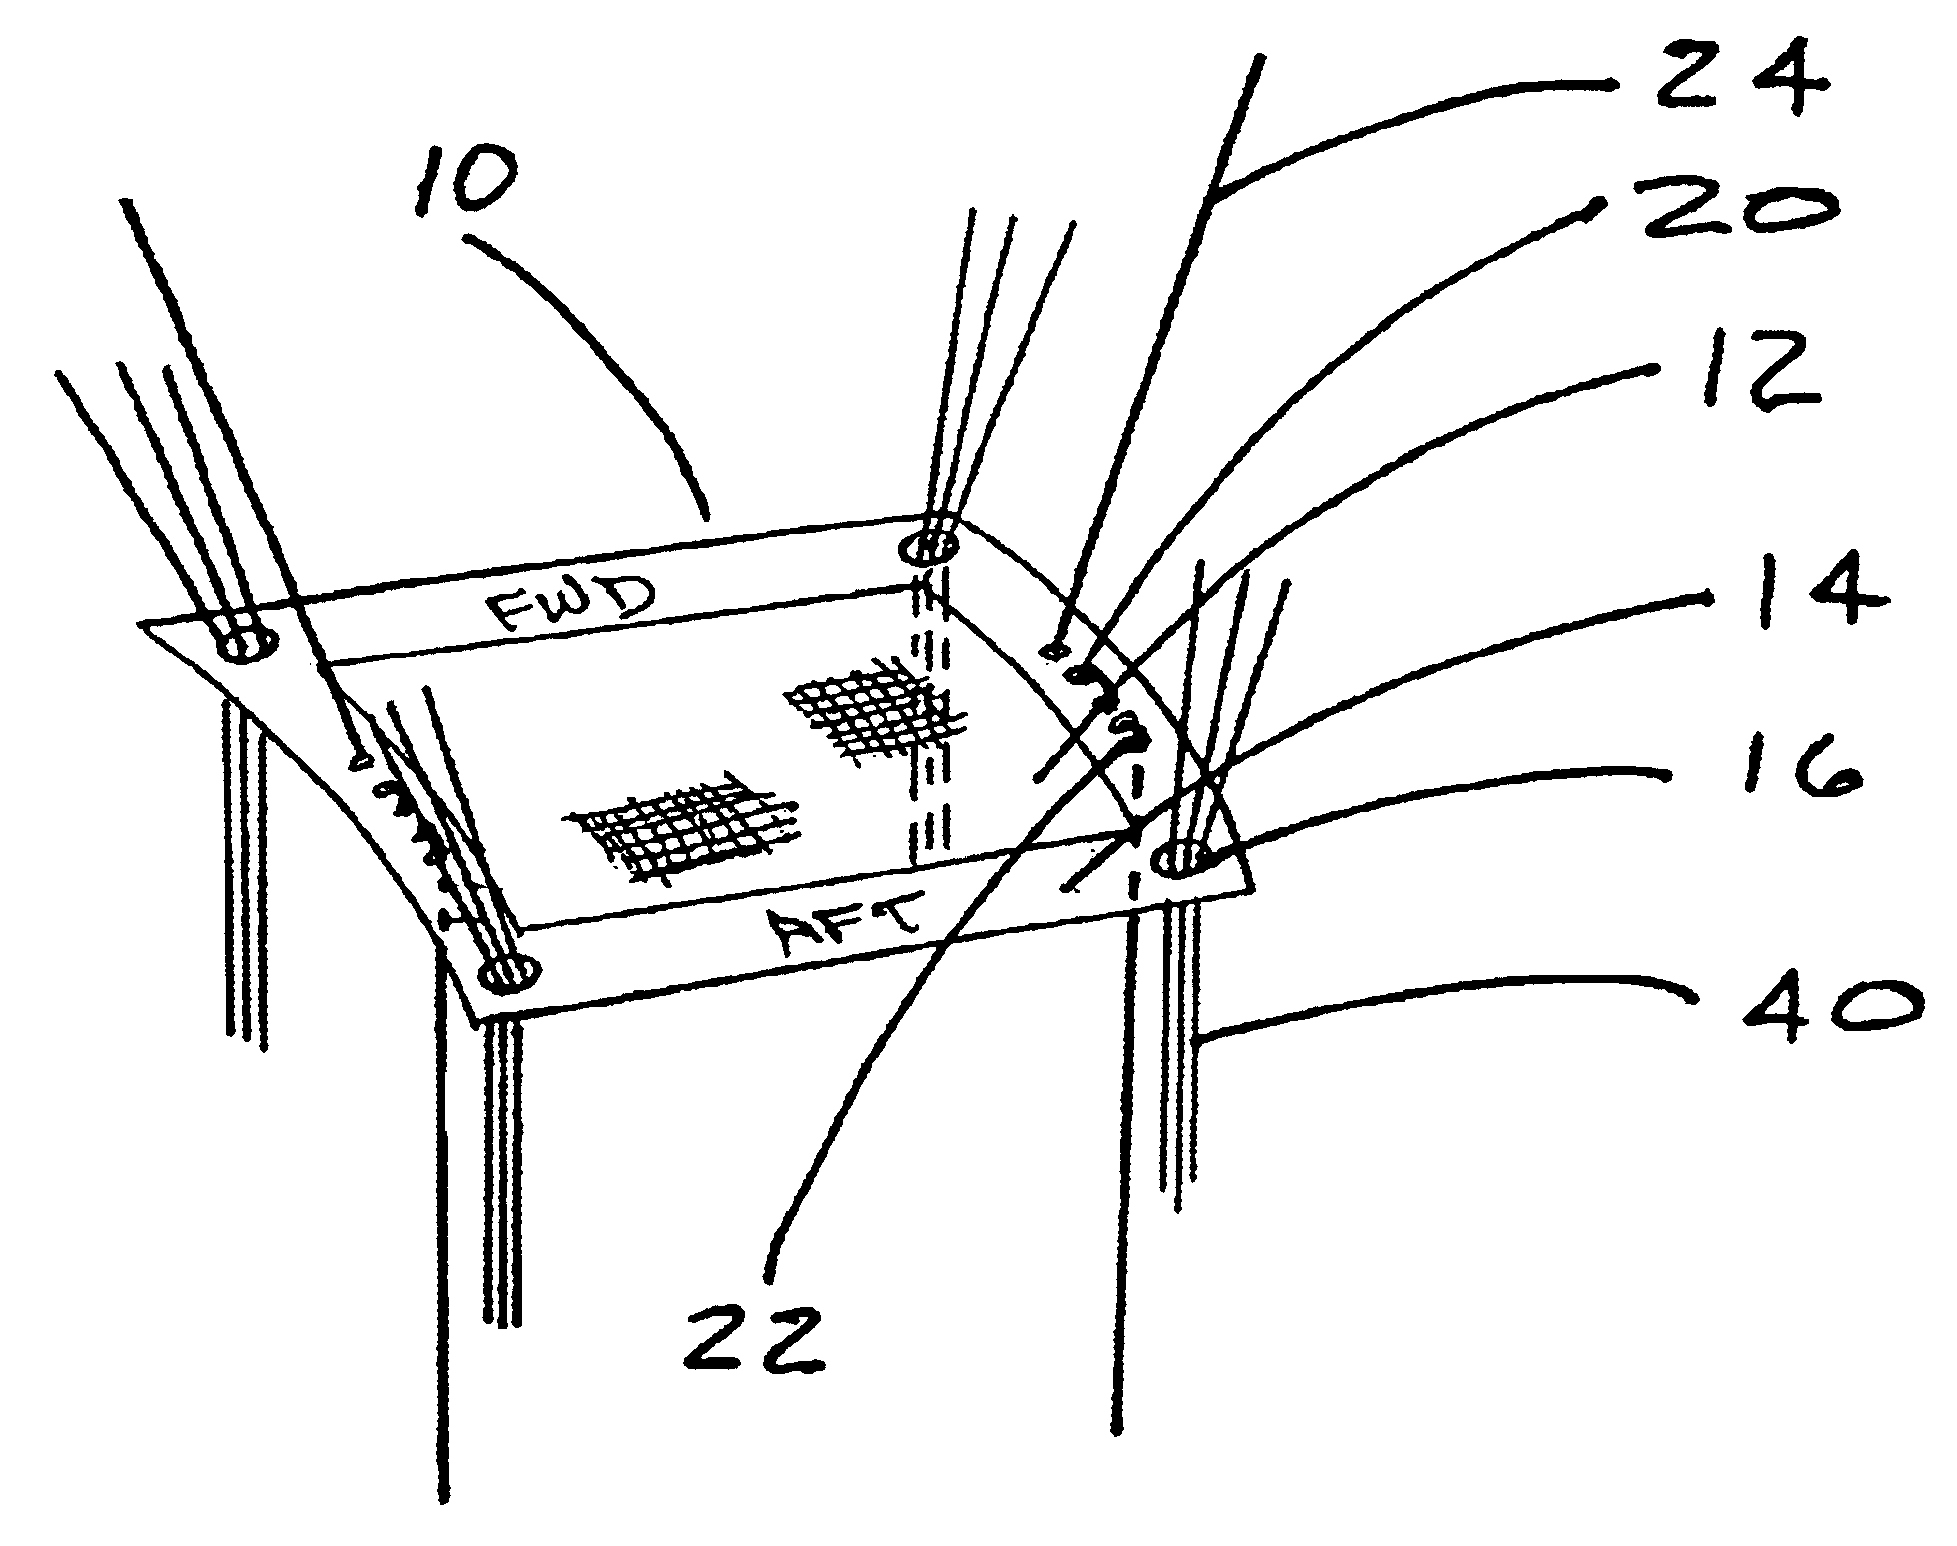 Parachute slider reefing with friction induced retardation